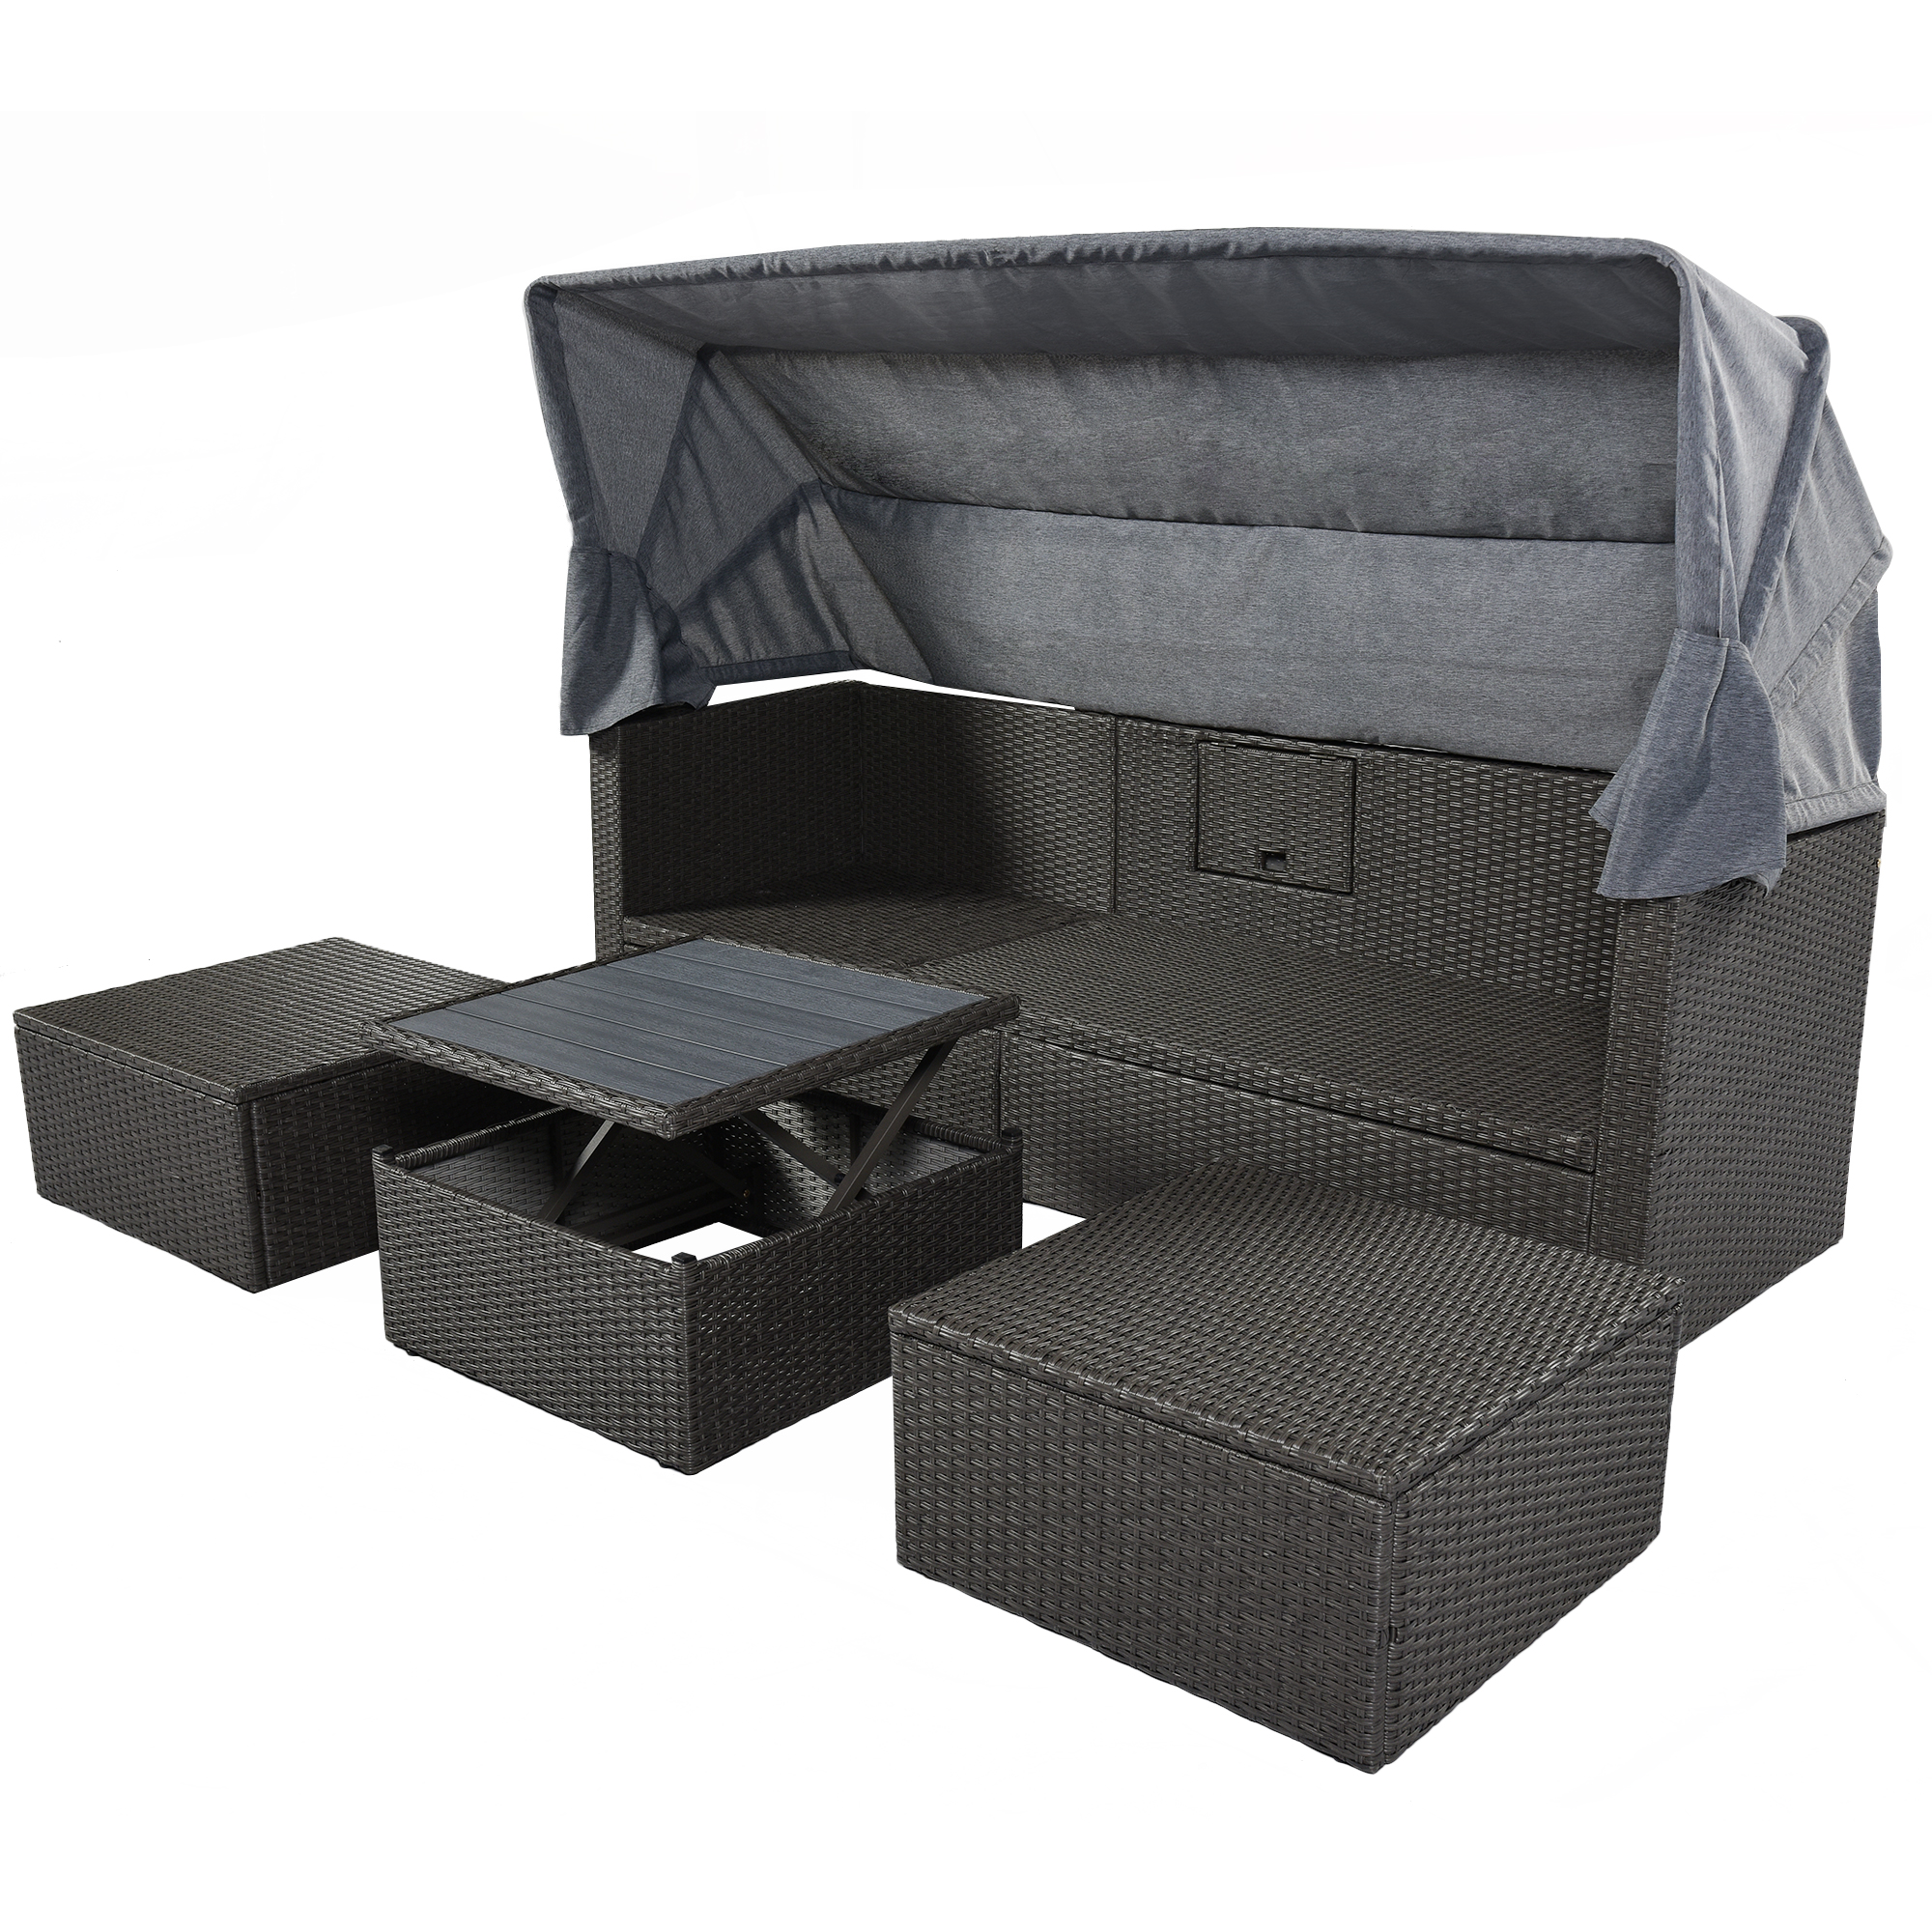 Outdoor Patio Rectangle Daybed with Retractable Canopy,  Wicker Furniture Sectional Seating with Washable Cushions, Backyard, Porch-CASAINC